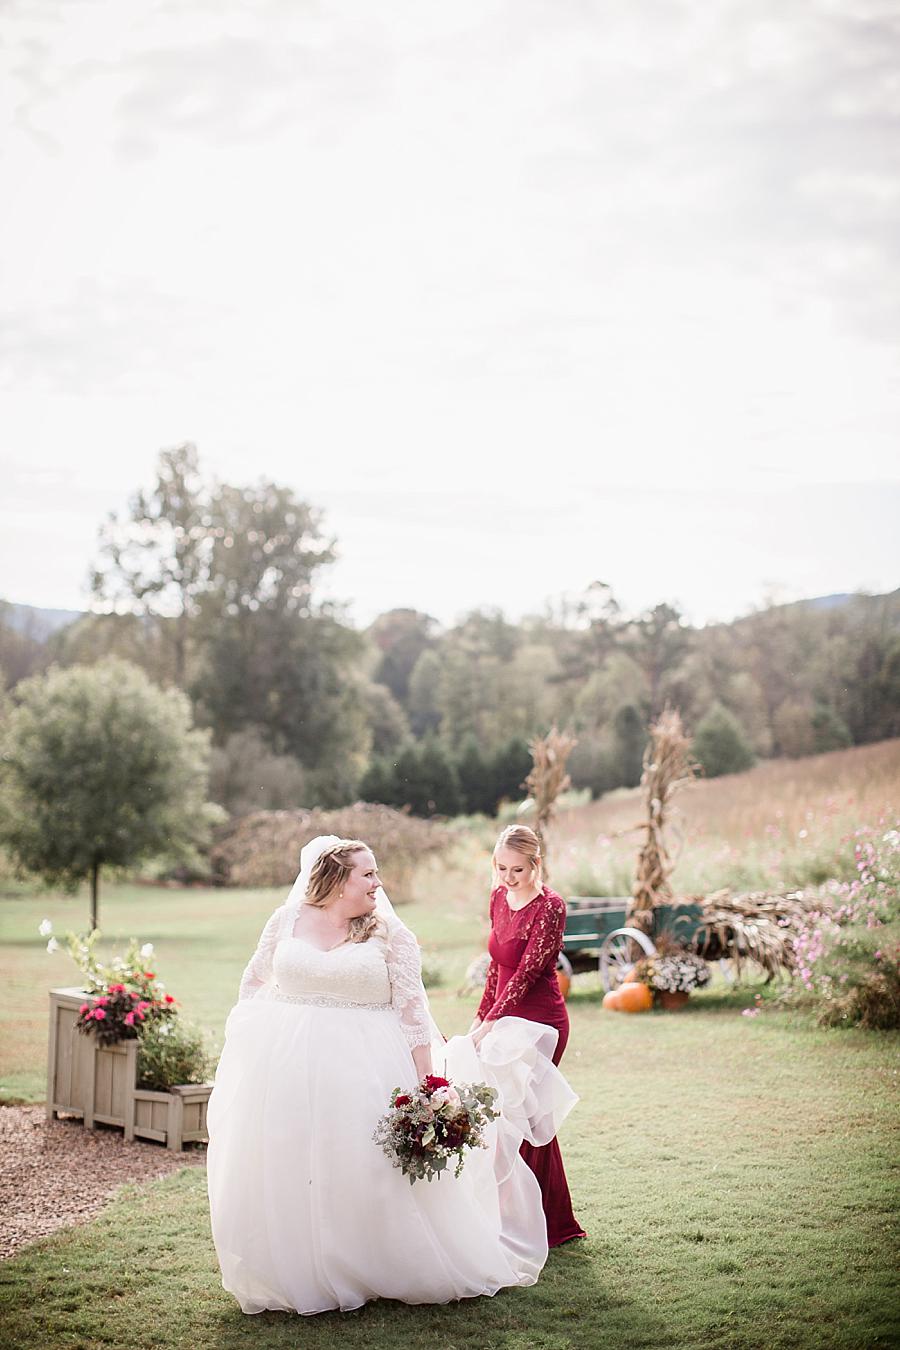 Fall decorations at this Sampson's Hollow Fall Wedding by Knoxville Wedding Photographer, Amanda May Photos.